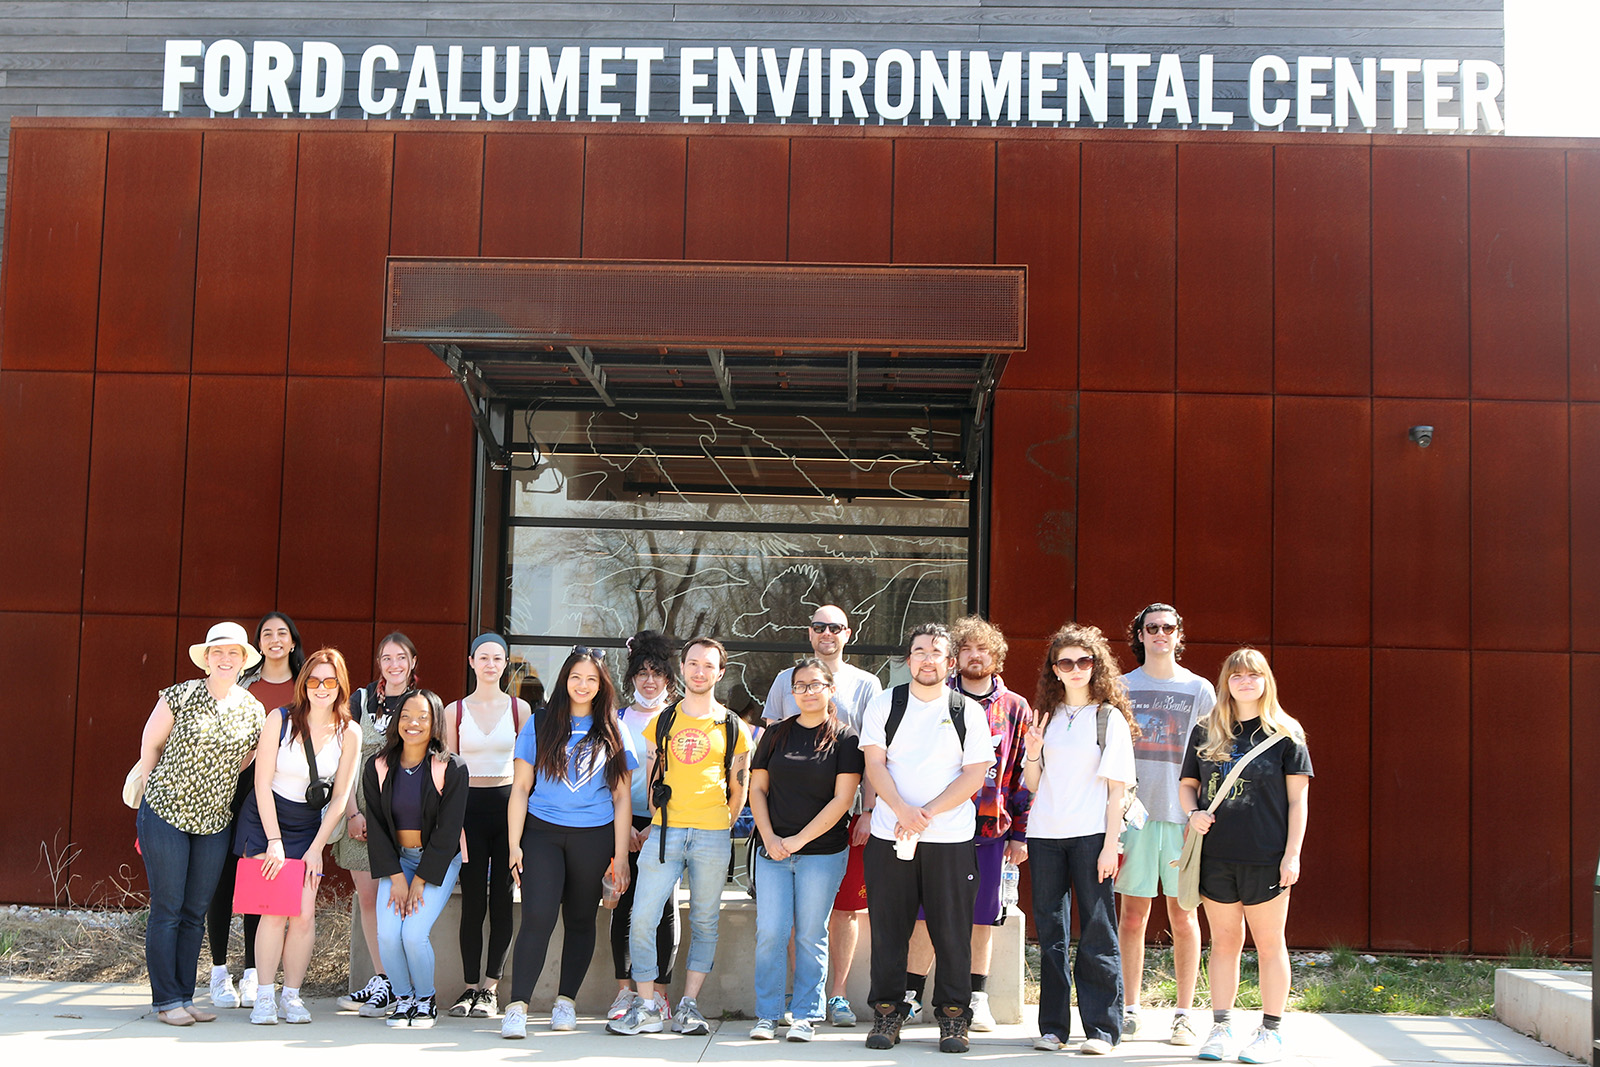 A group of students and professors stand under a sign for the Ford Calument River Center